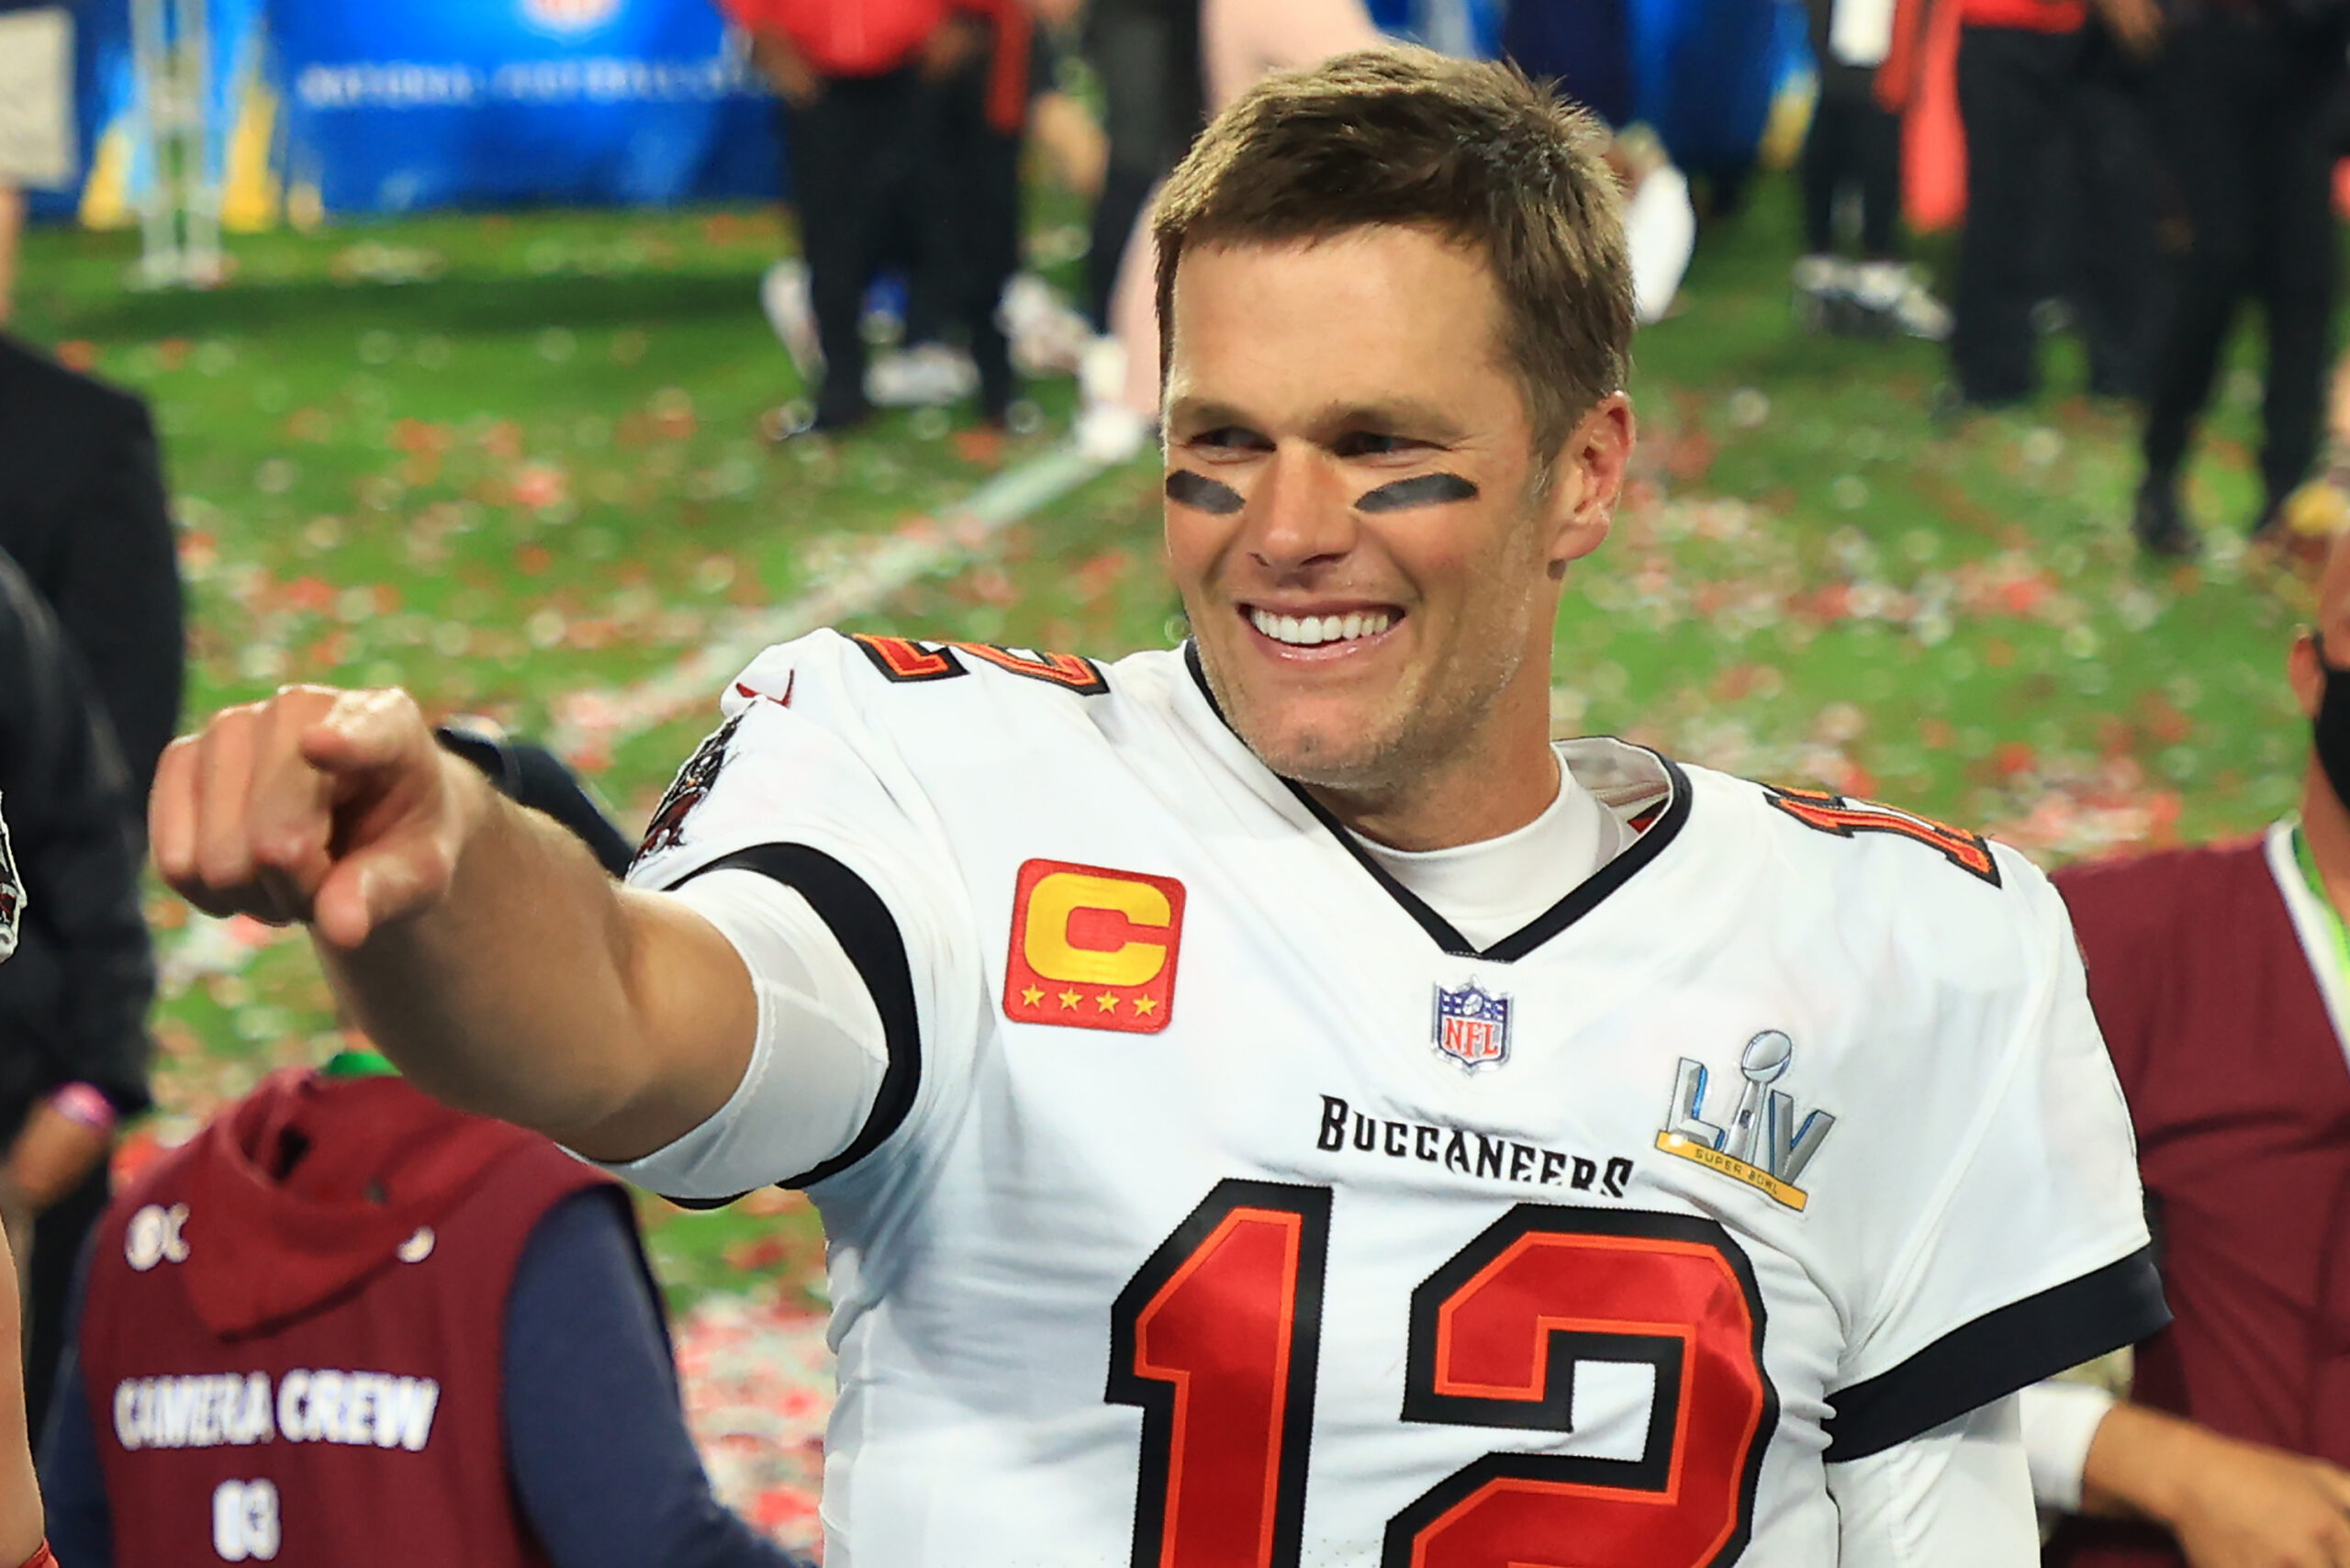  Tom Brady unretires and wants to return to the NFL next season